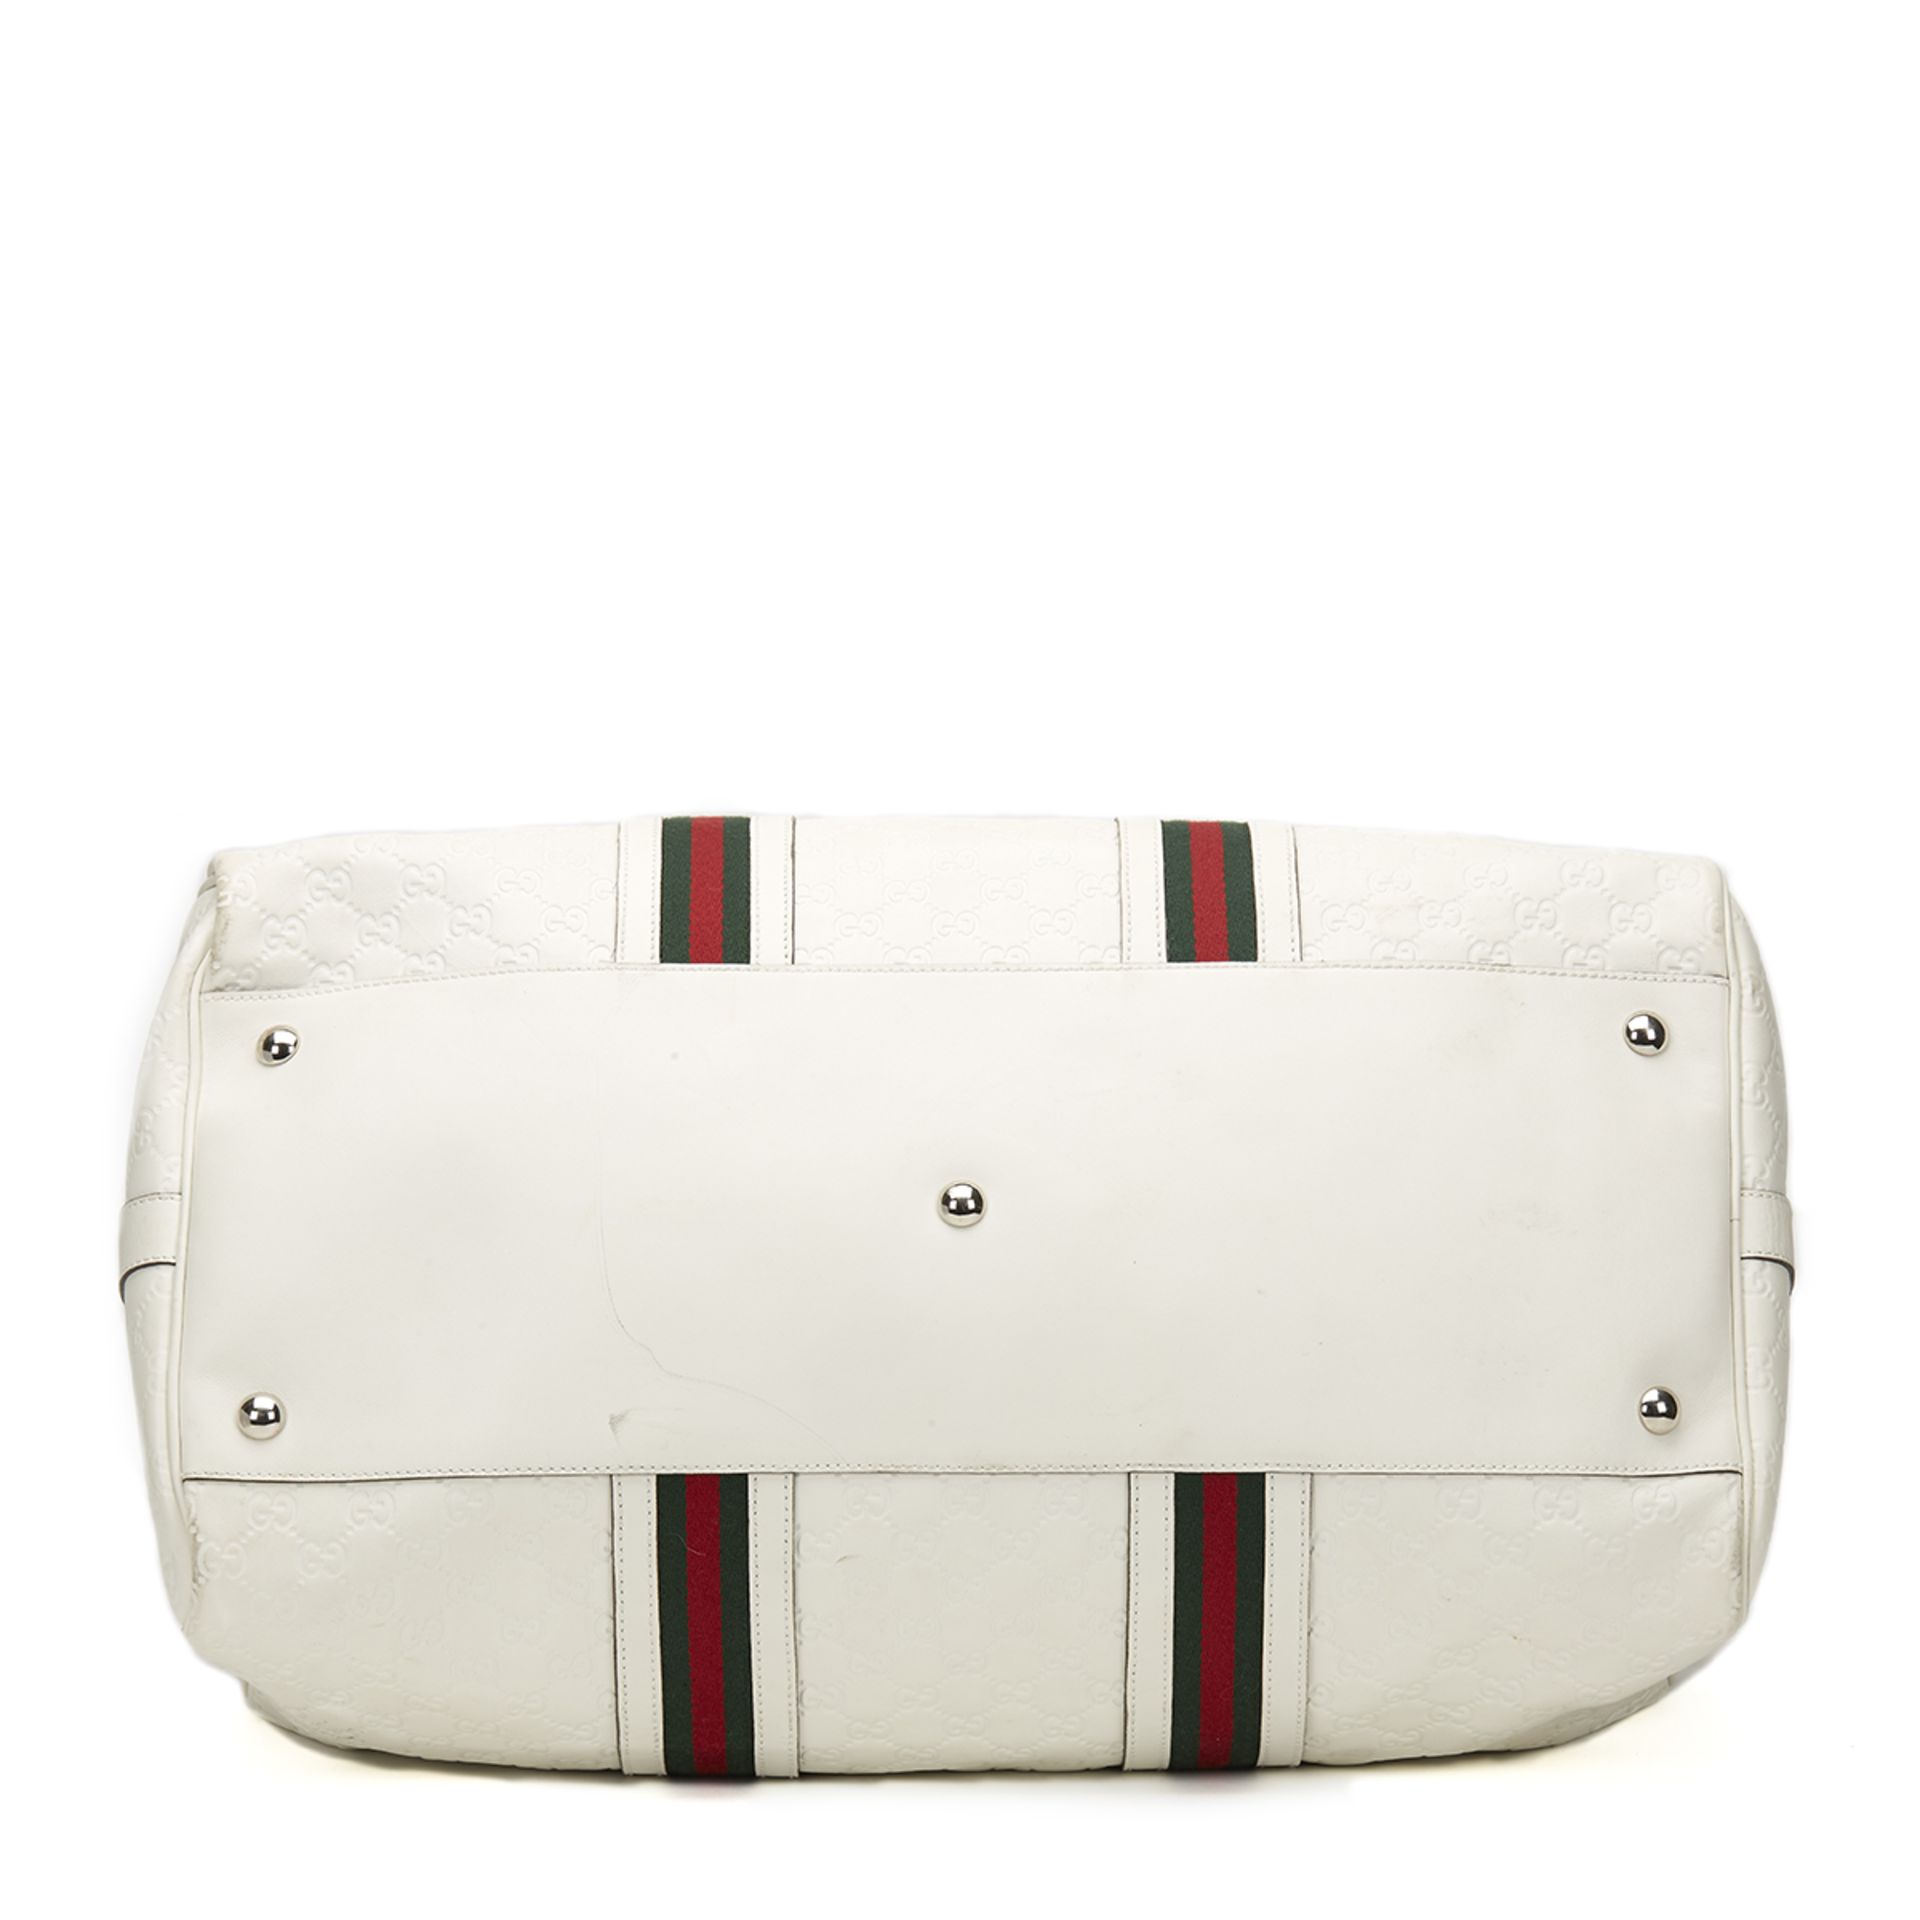 Gucci, Holdall - Image 5 of 8